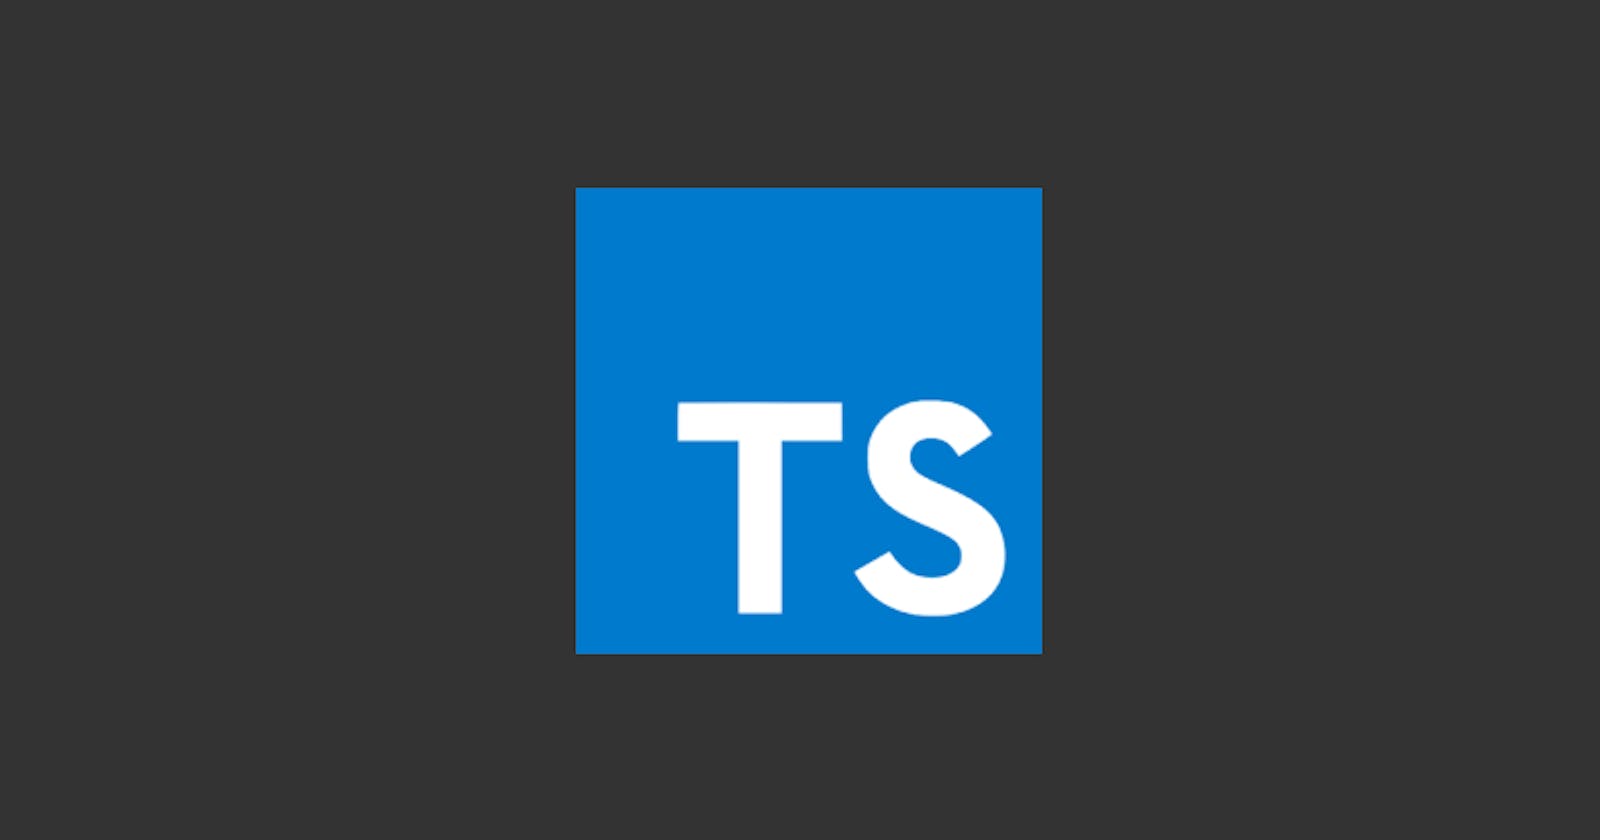 Getting started with TypeScript